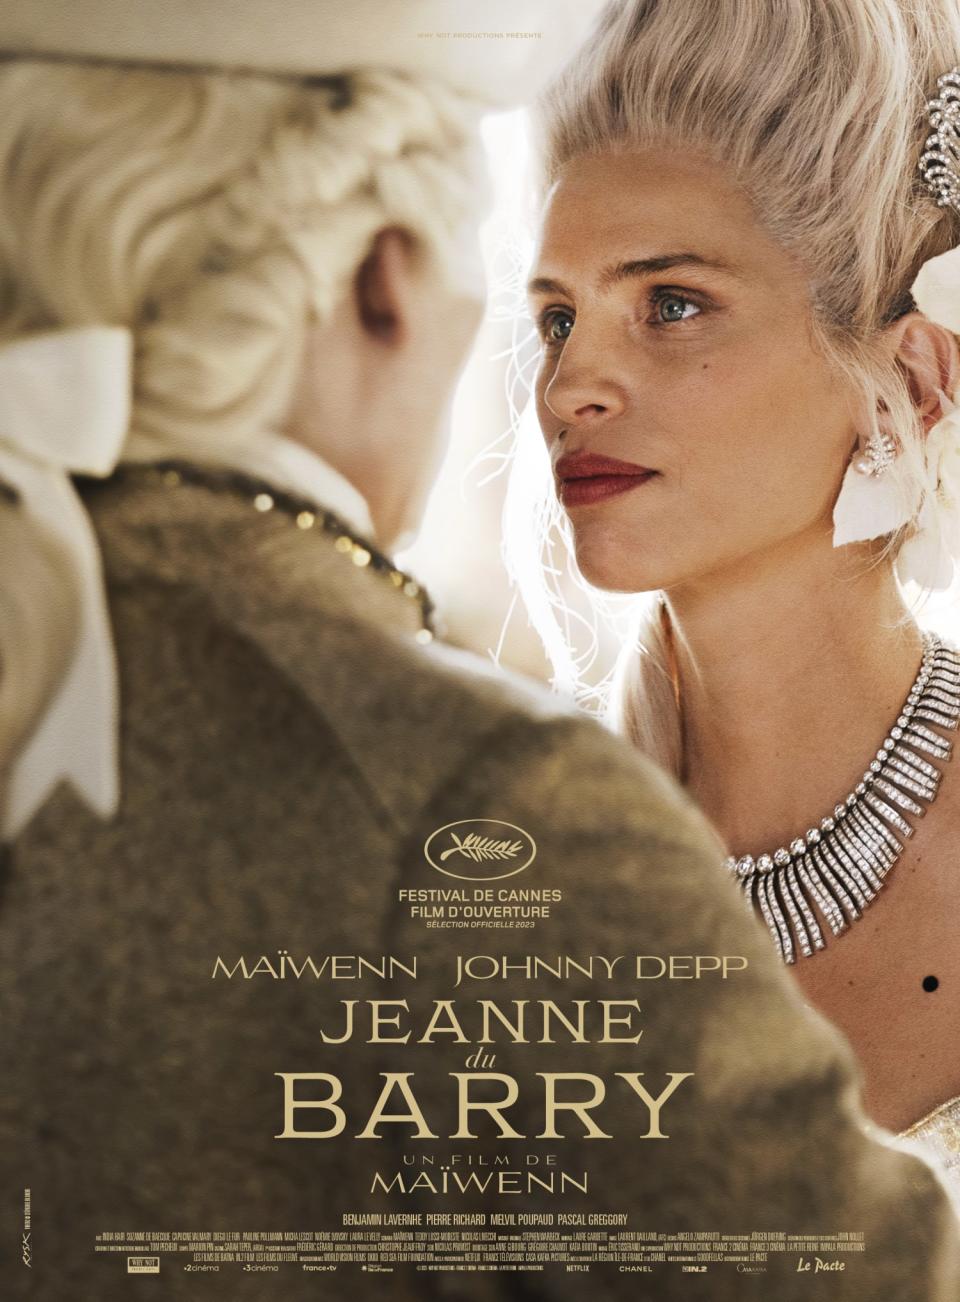 The poster for "Jeanne du Barry"